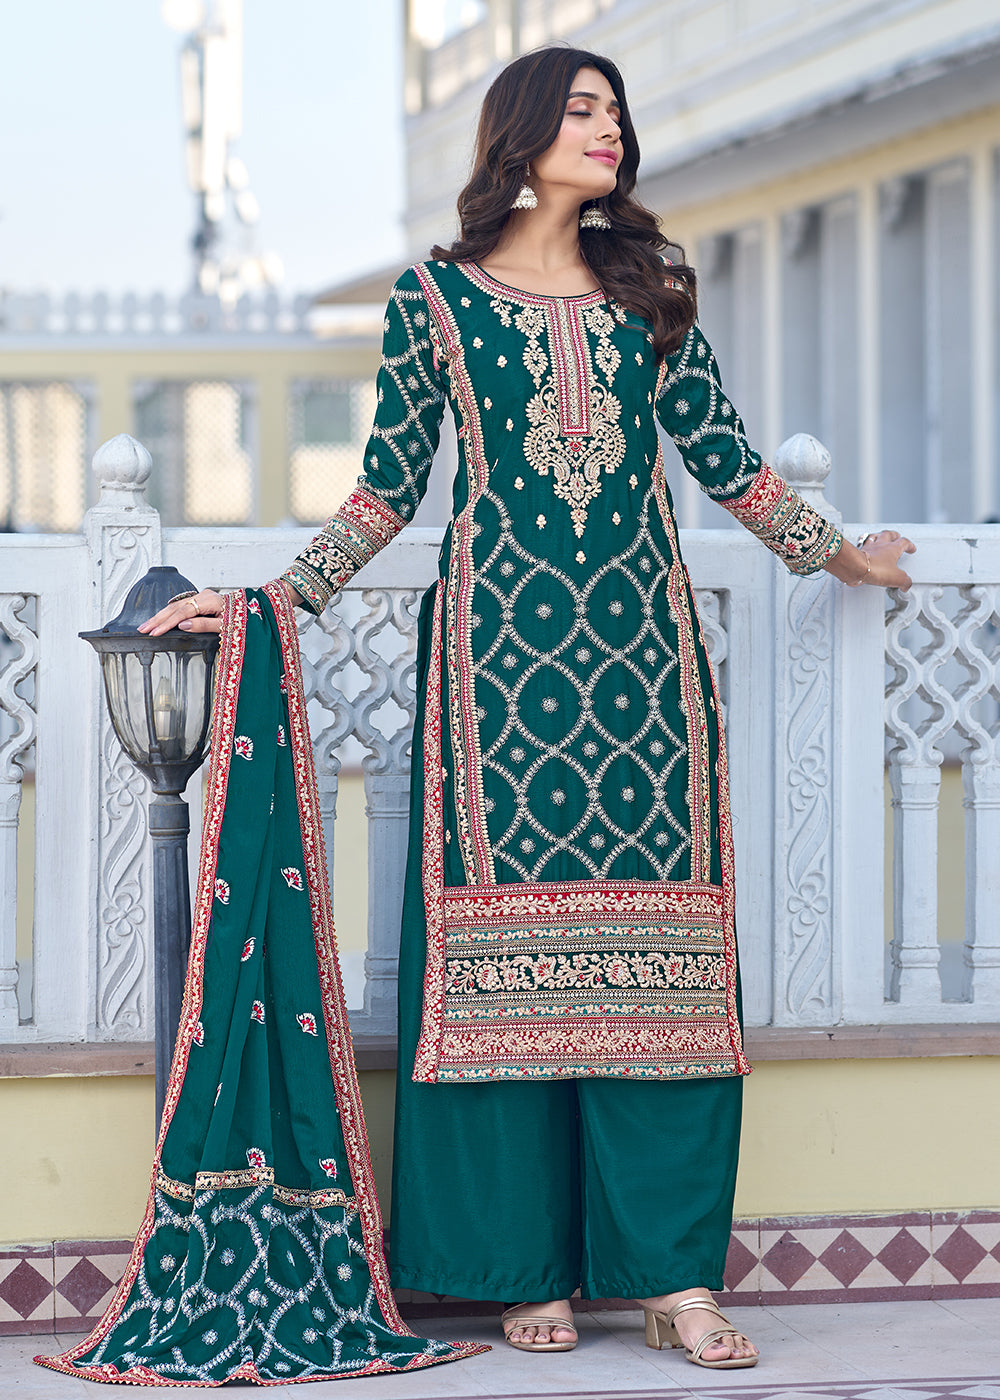 Buy Now Palazzo Style Teal Green Chinnon Embroidered Salwar Suit Online in USA, UK, Canada, Germany, Australia & Worldwide at Empress Clothing. 